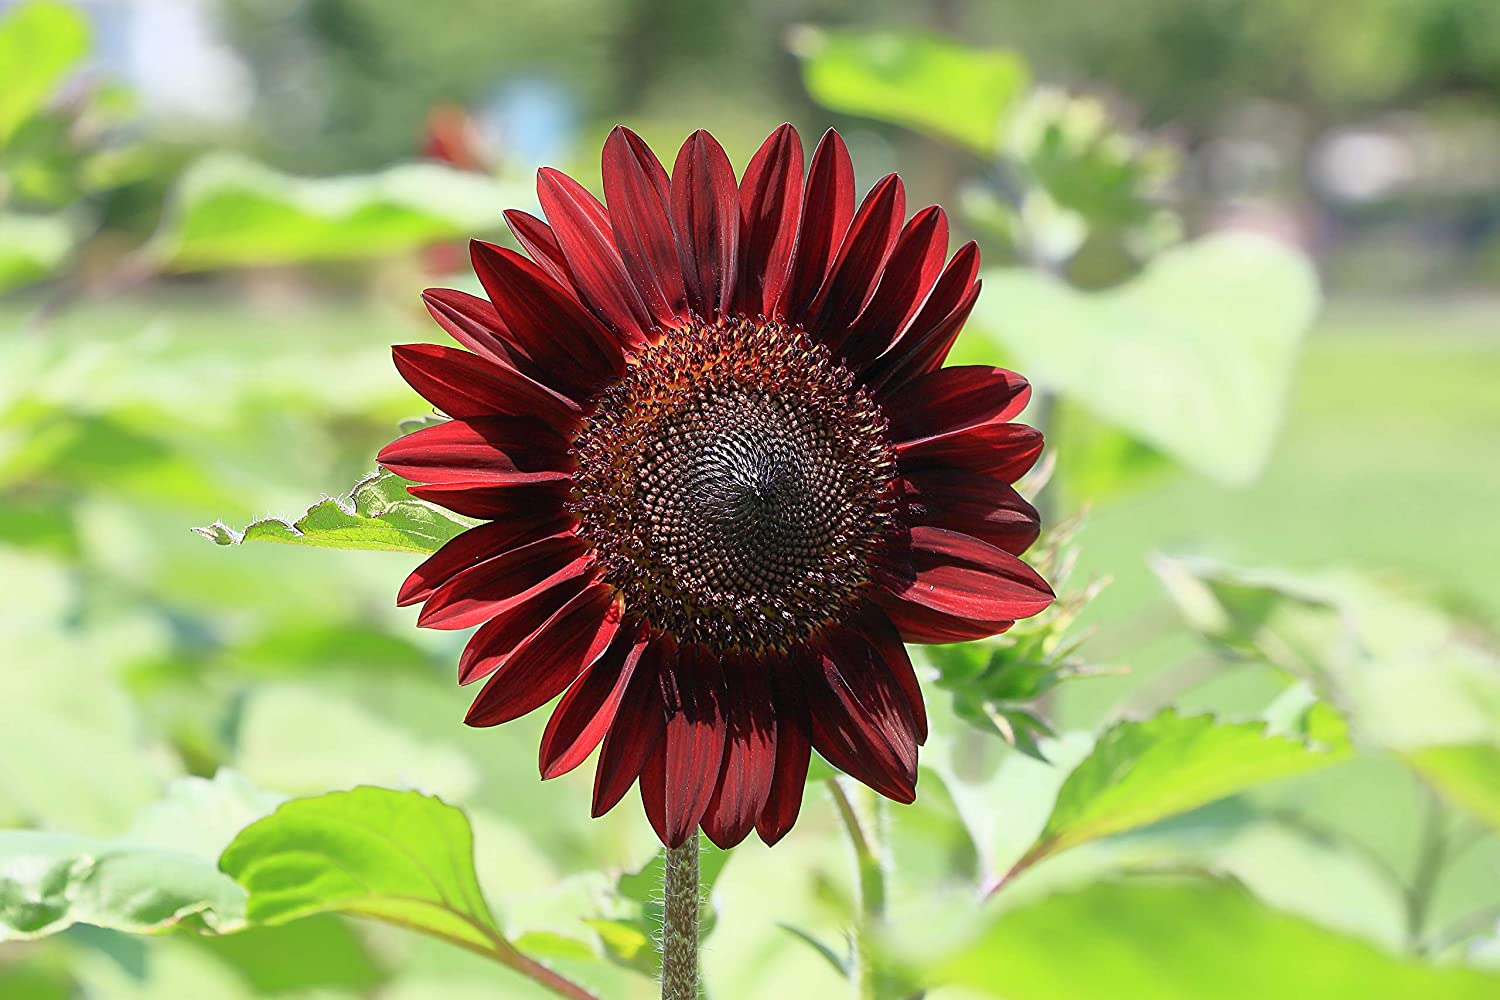 Chocolate Cherry Sunflowers Are A Thing, And They're Just As Beautiful ...